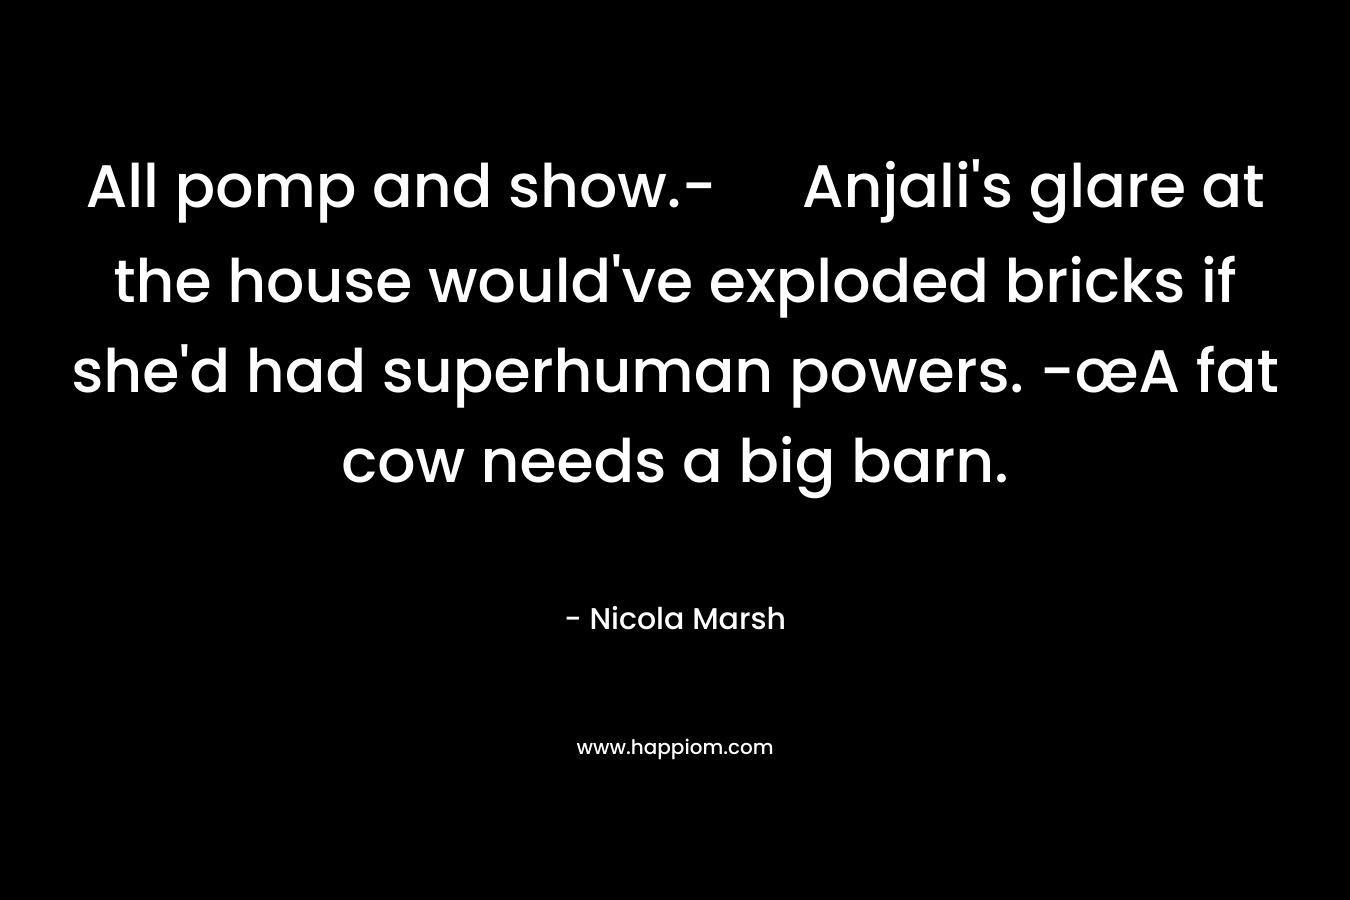 All pomp and show.- Anjali’s glare at the house would’ve exploded bricks if she’d had superhuman powers. -œA fat cow needs a big barn. – Nicola Marsh